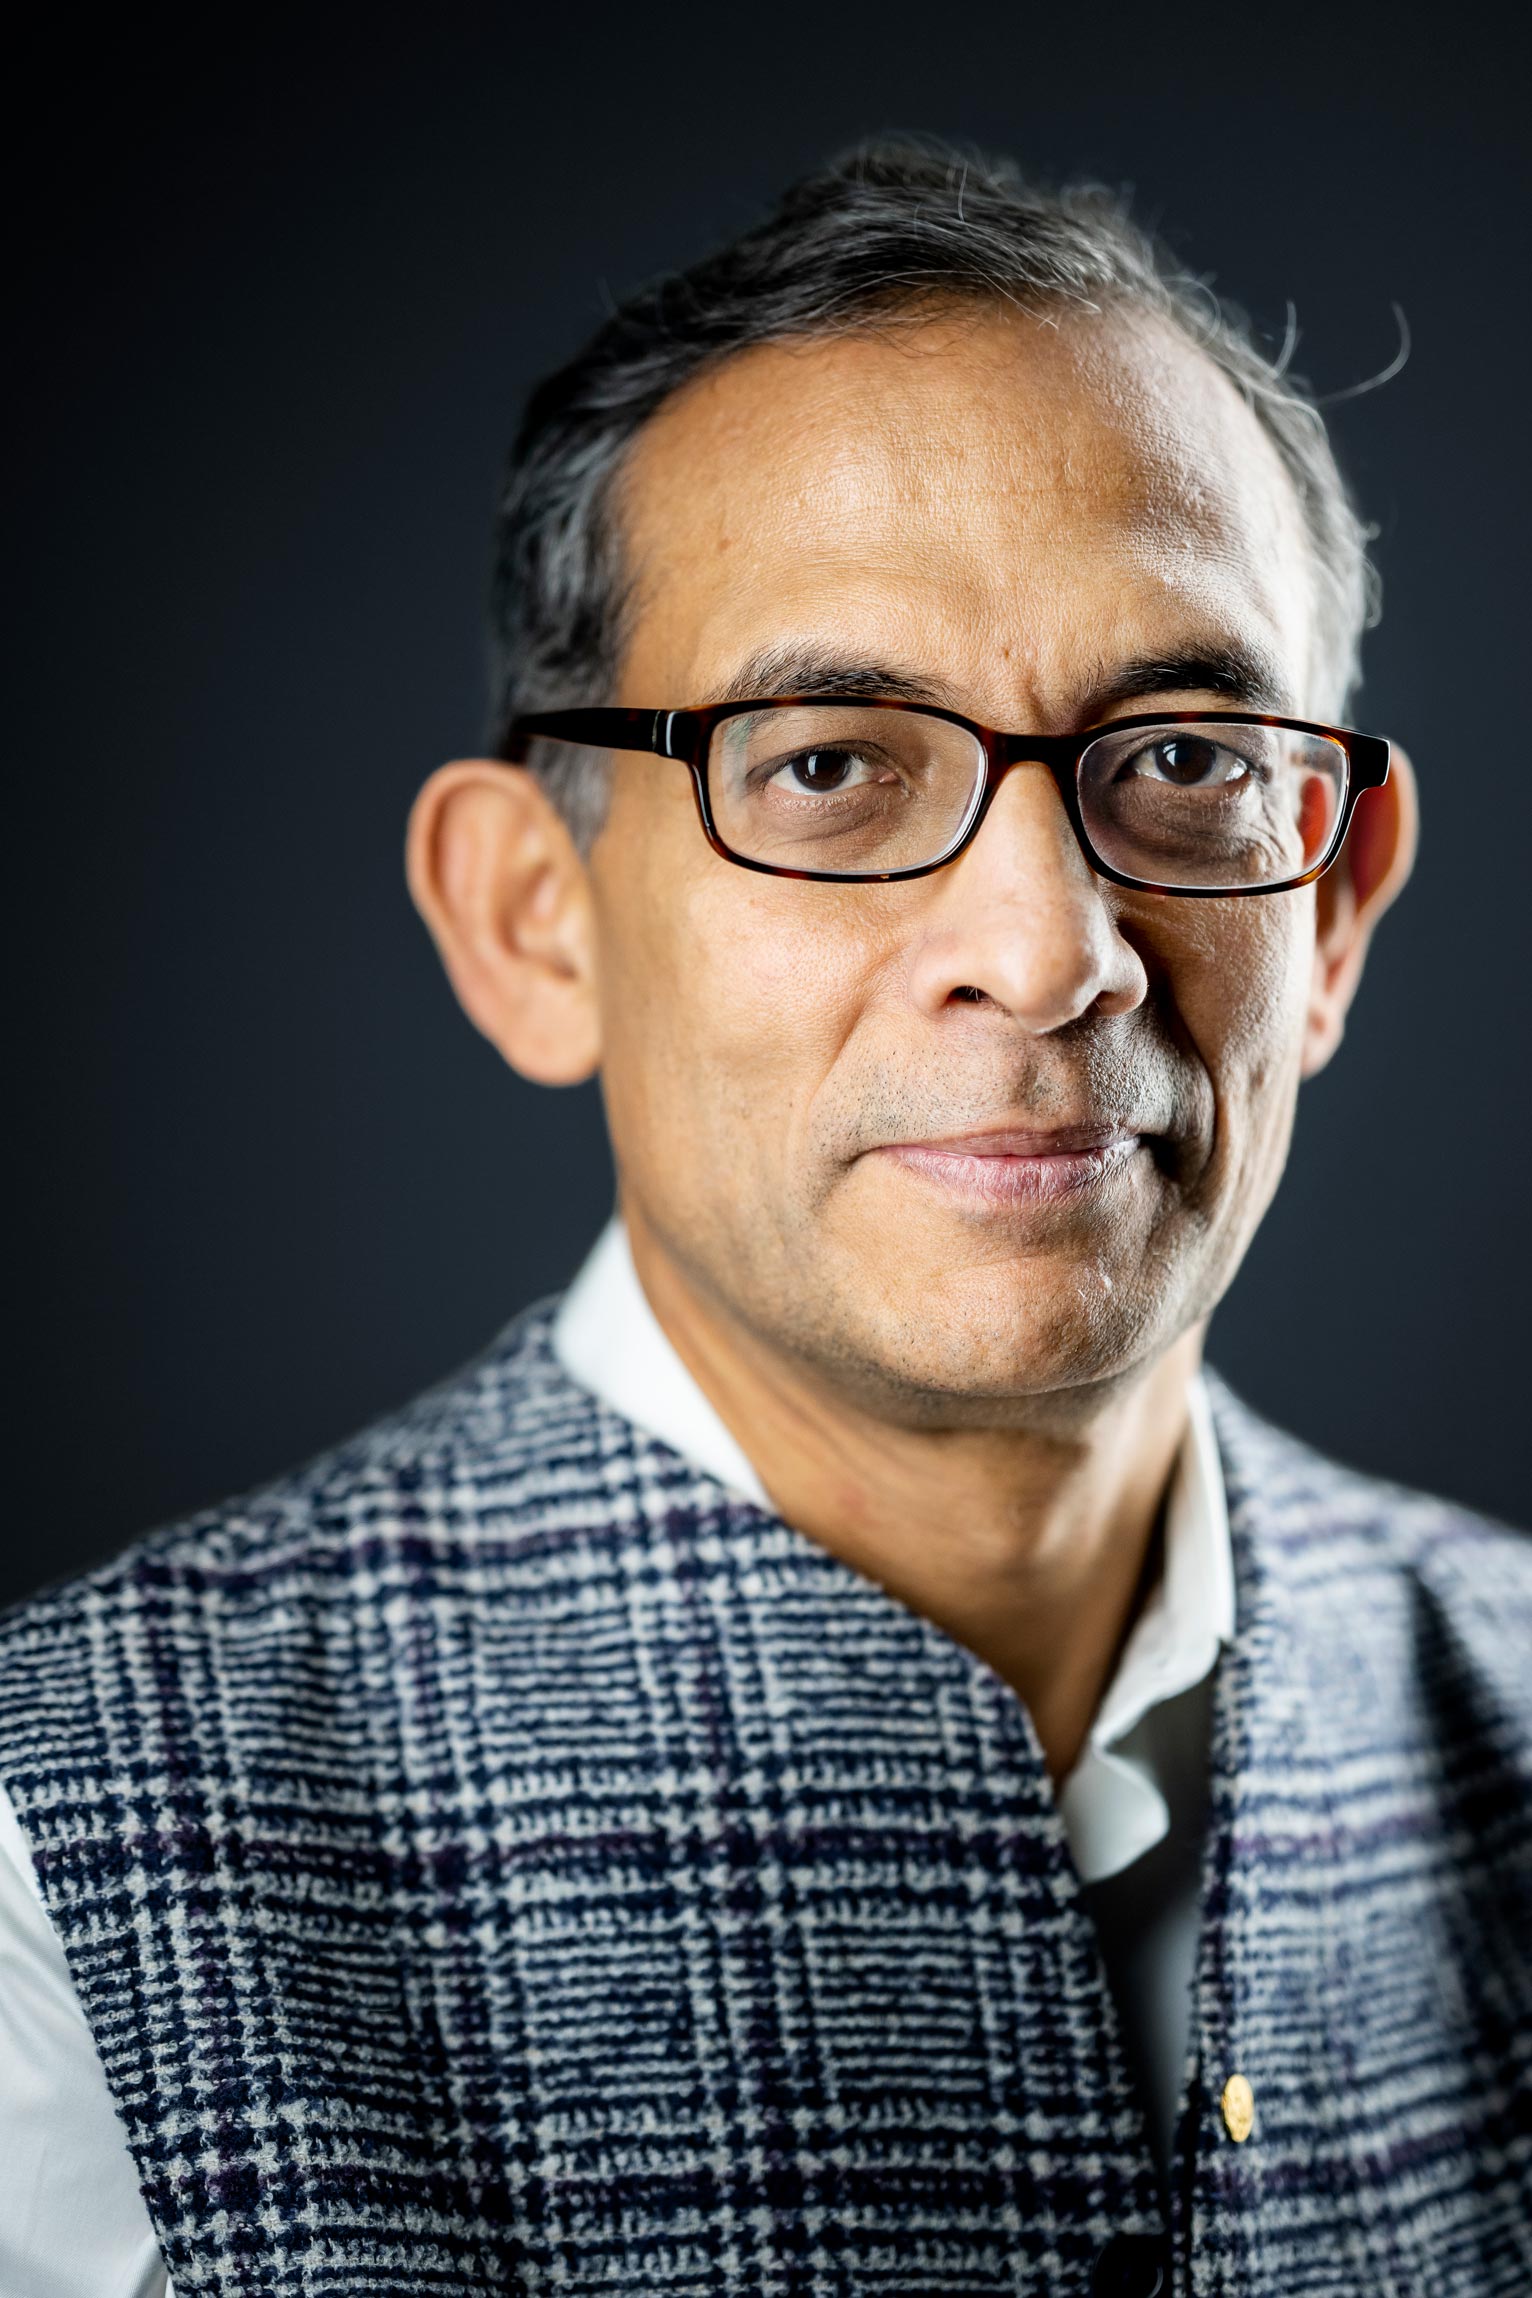 Nobel laureate Abhijit Banerjee © Nobel Media. Photo: A. Mahmoud; The economist is a professor at the Massachusetts Institute of Technology (MIT) in Cambridge, USA. He grew up in Calcutta as the son of two economists. In 2019, he received the Nobel Prize in Economics with his wife Esther Duflo and Michael Kremer. Banerjee and Duflo were among the founders of the Abdul Latif Jameel Poverty Action Lab at MIT in 2003, which combats poverty based on results from field experiments. (PS)